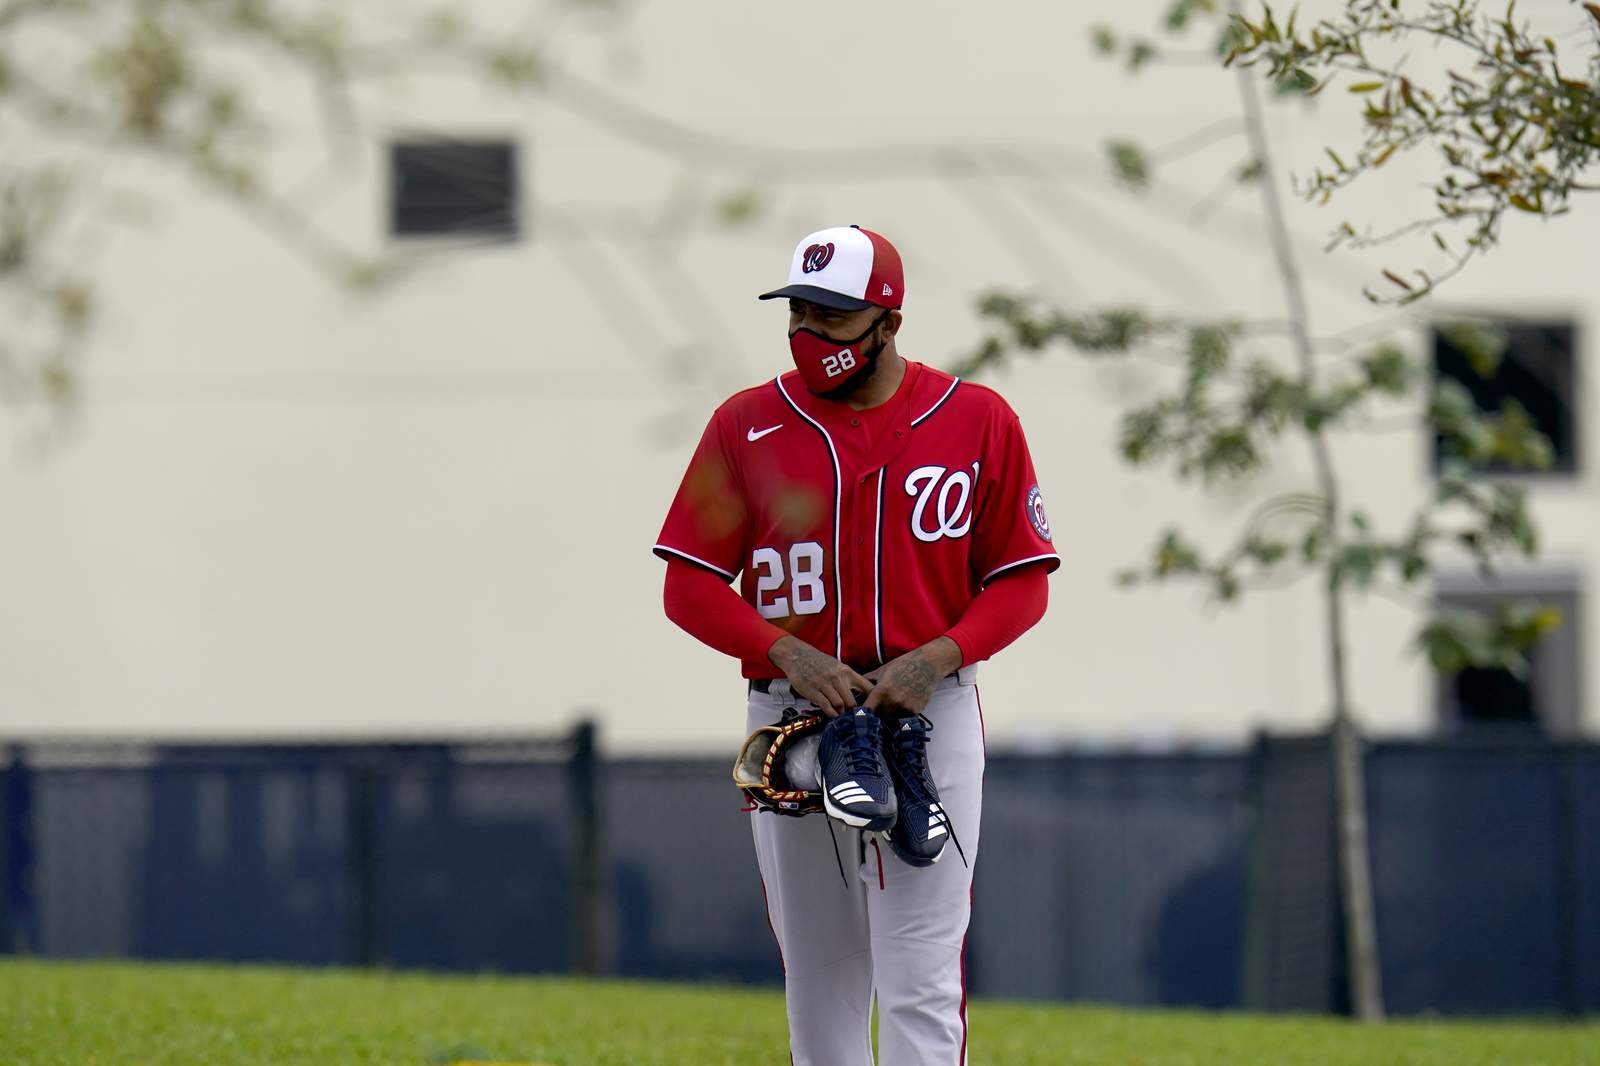 Nats release Jeffress for unspecified 'personnel reasons'